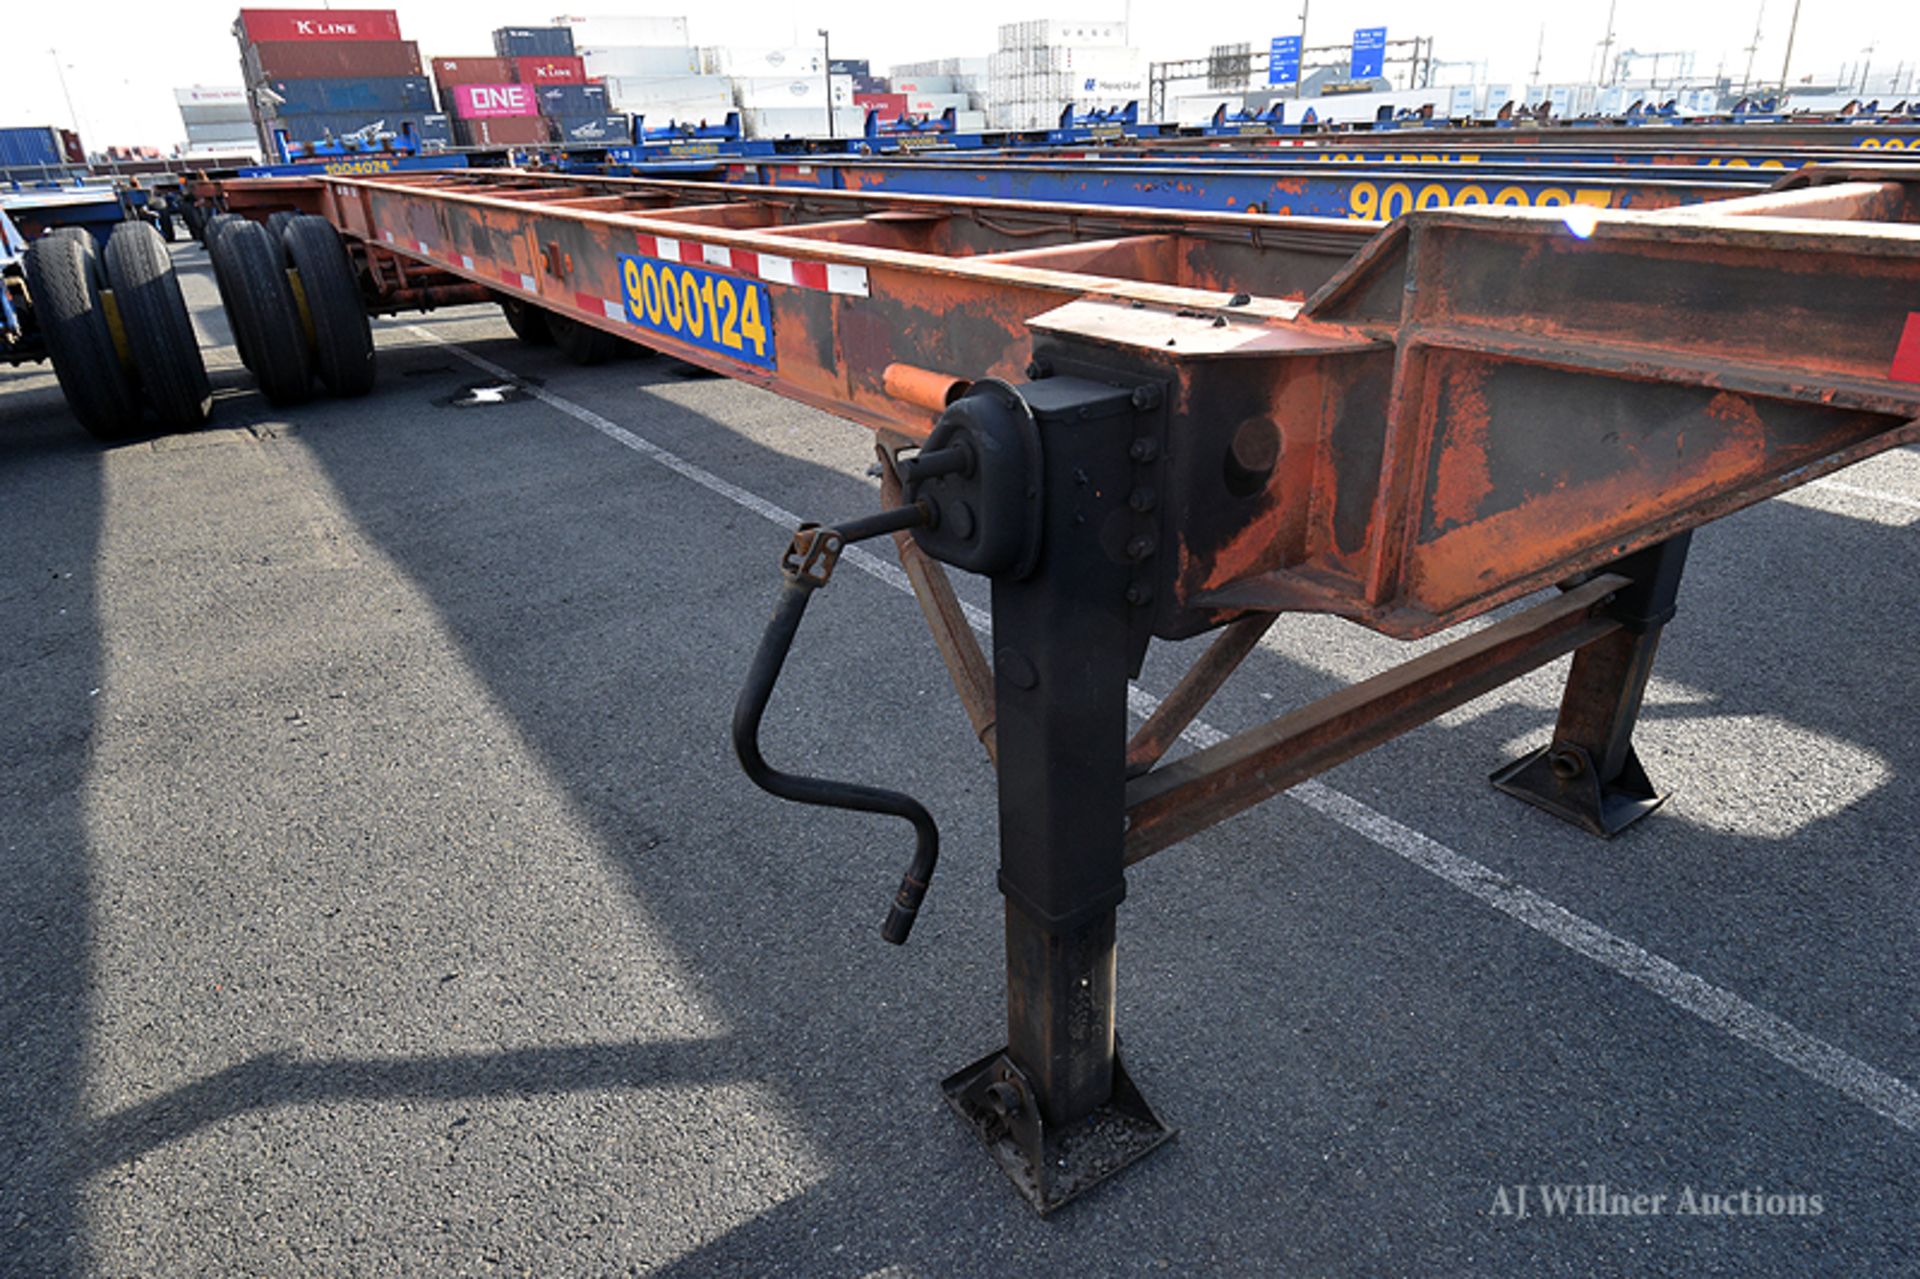 1987 Hyundai 40'-0 container chassis VIN 145C412S2HL009989 (Unit #9000124). - Image 2 of 5